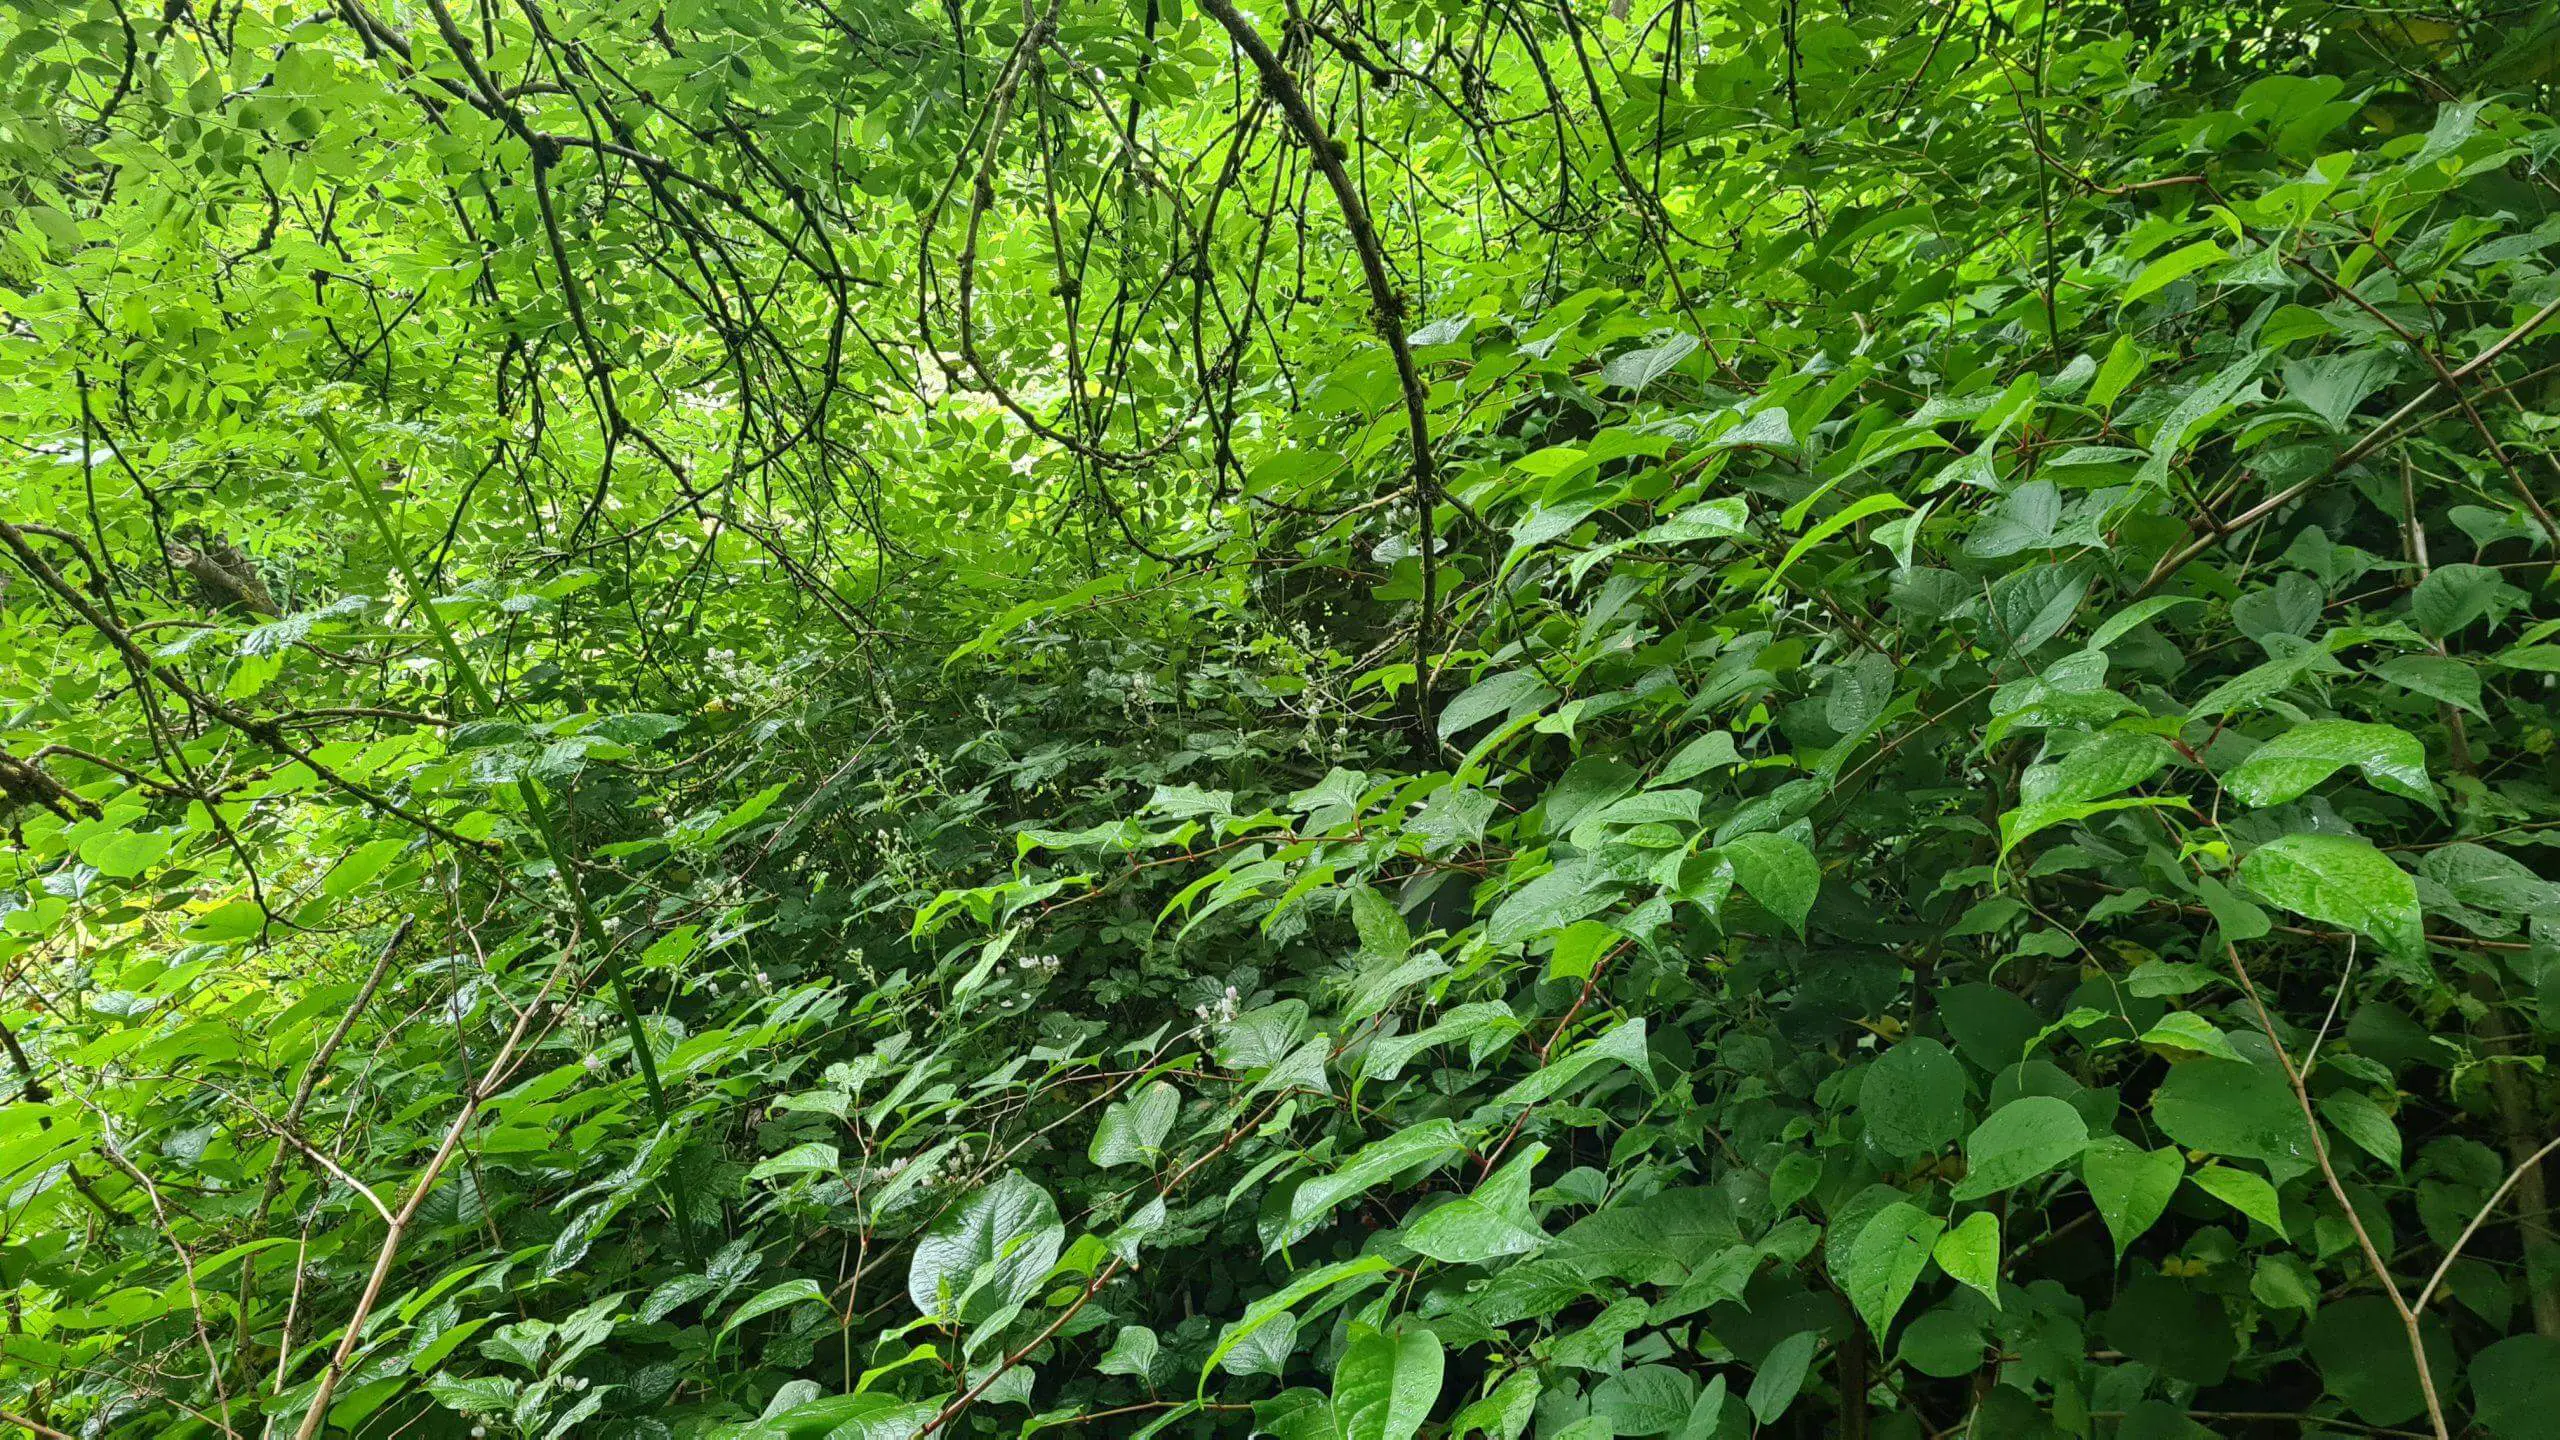 Treatment of an area of land infested by Japanese knotweed